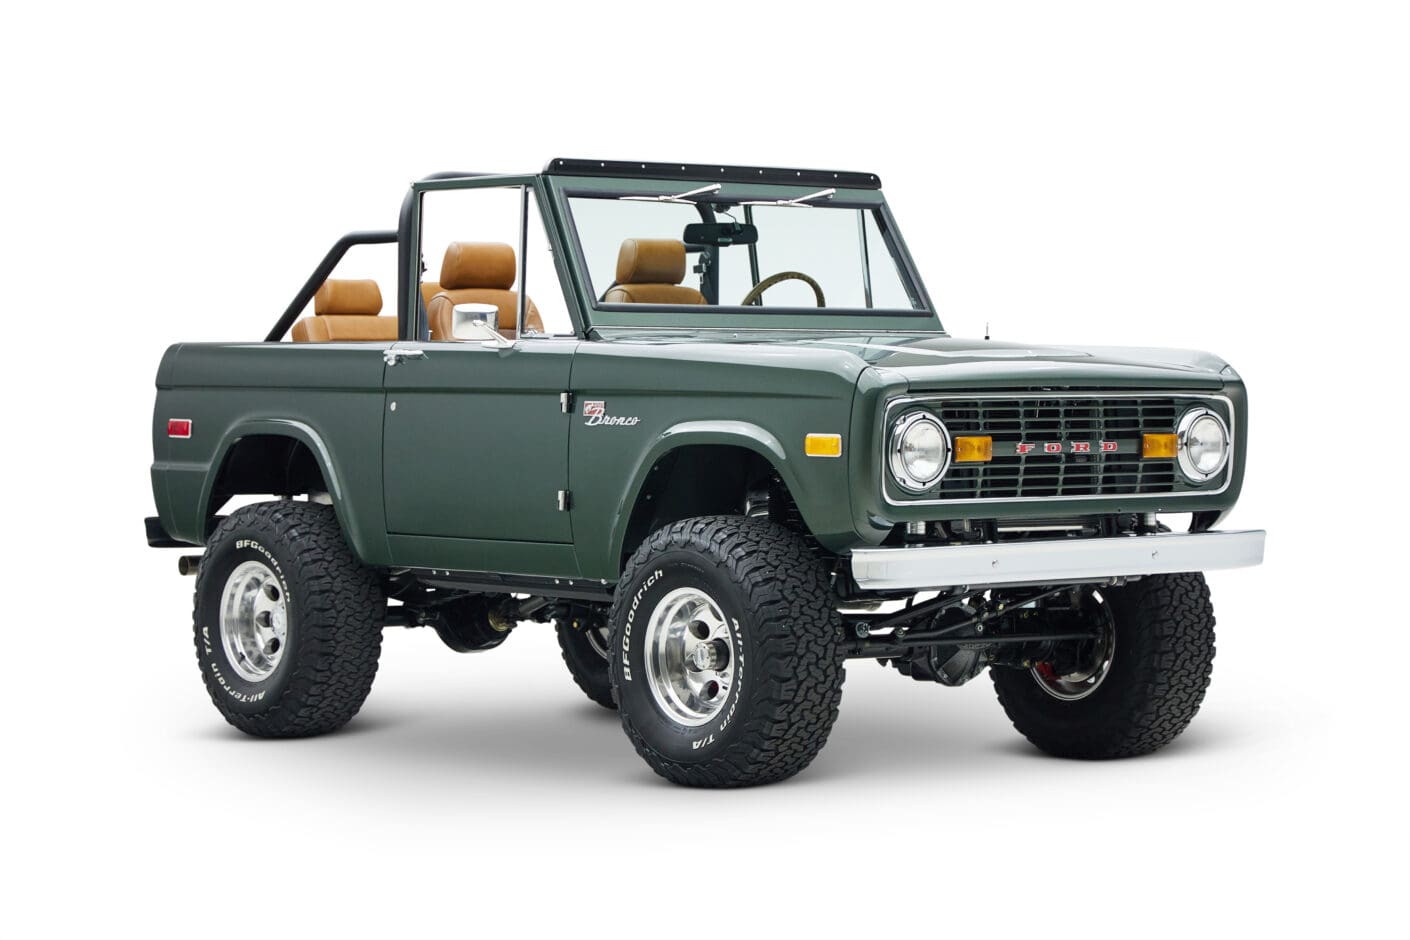 1973 classic ford bronco in highland green passenger front